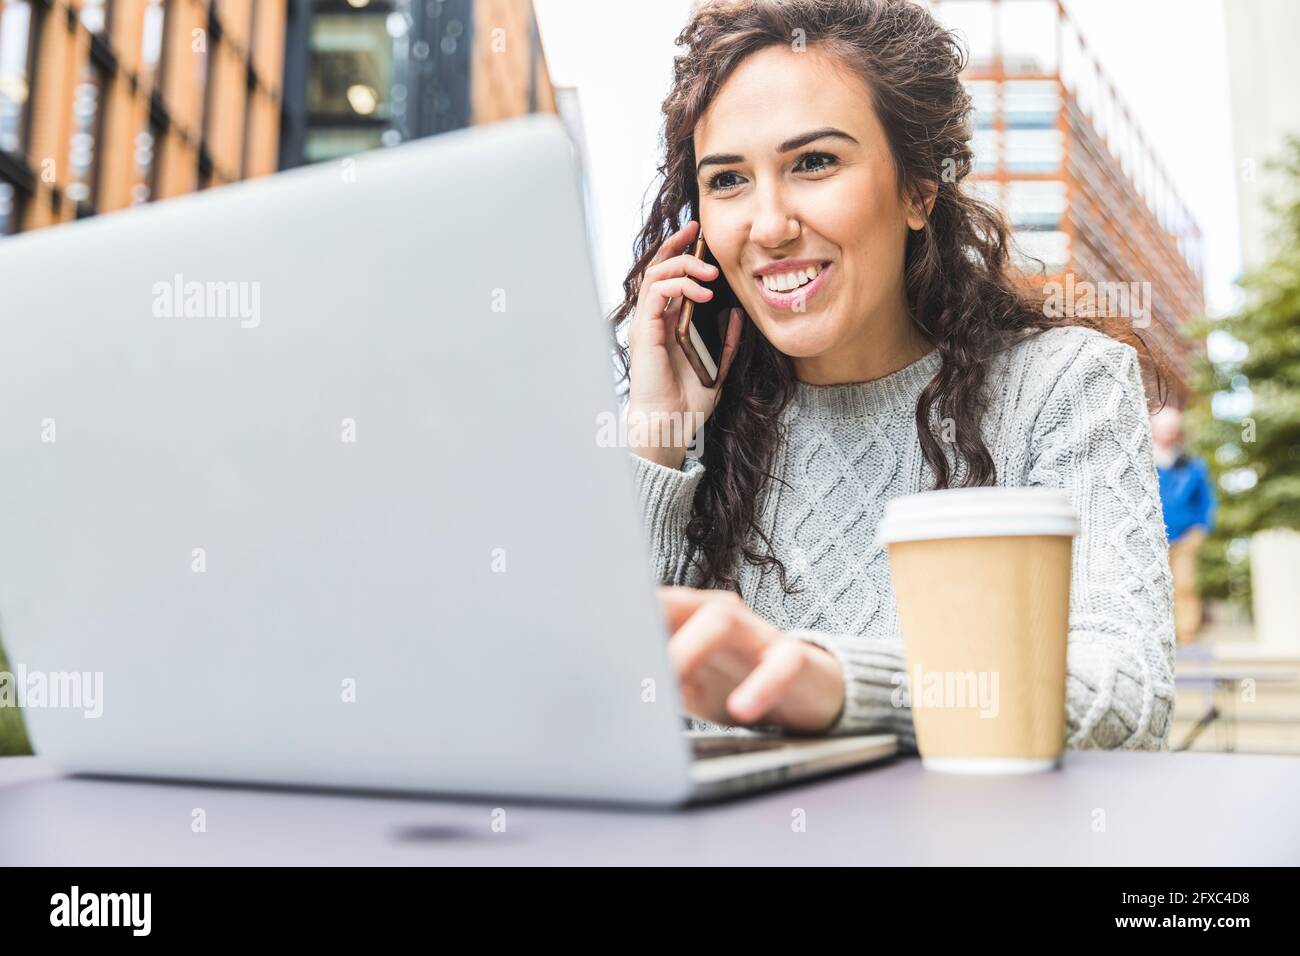 Beautiful female entrepreneur using laptop at cafe in city Stock Photo